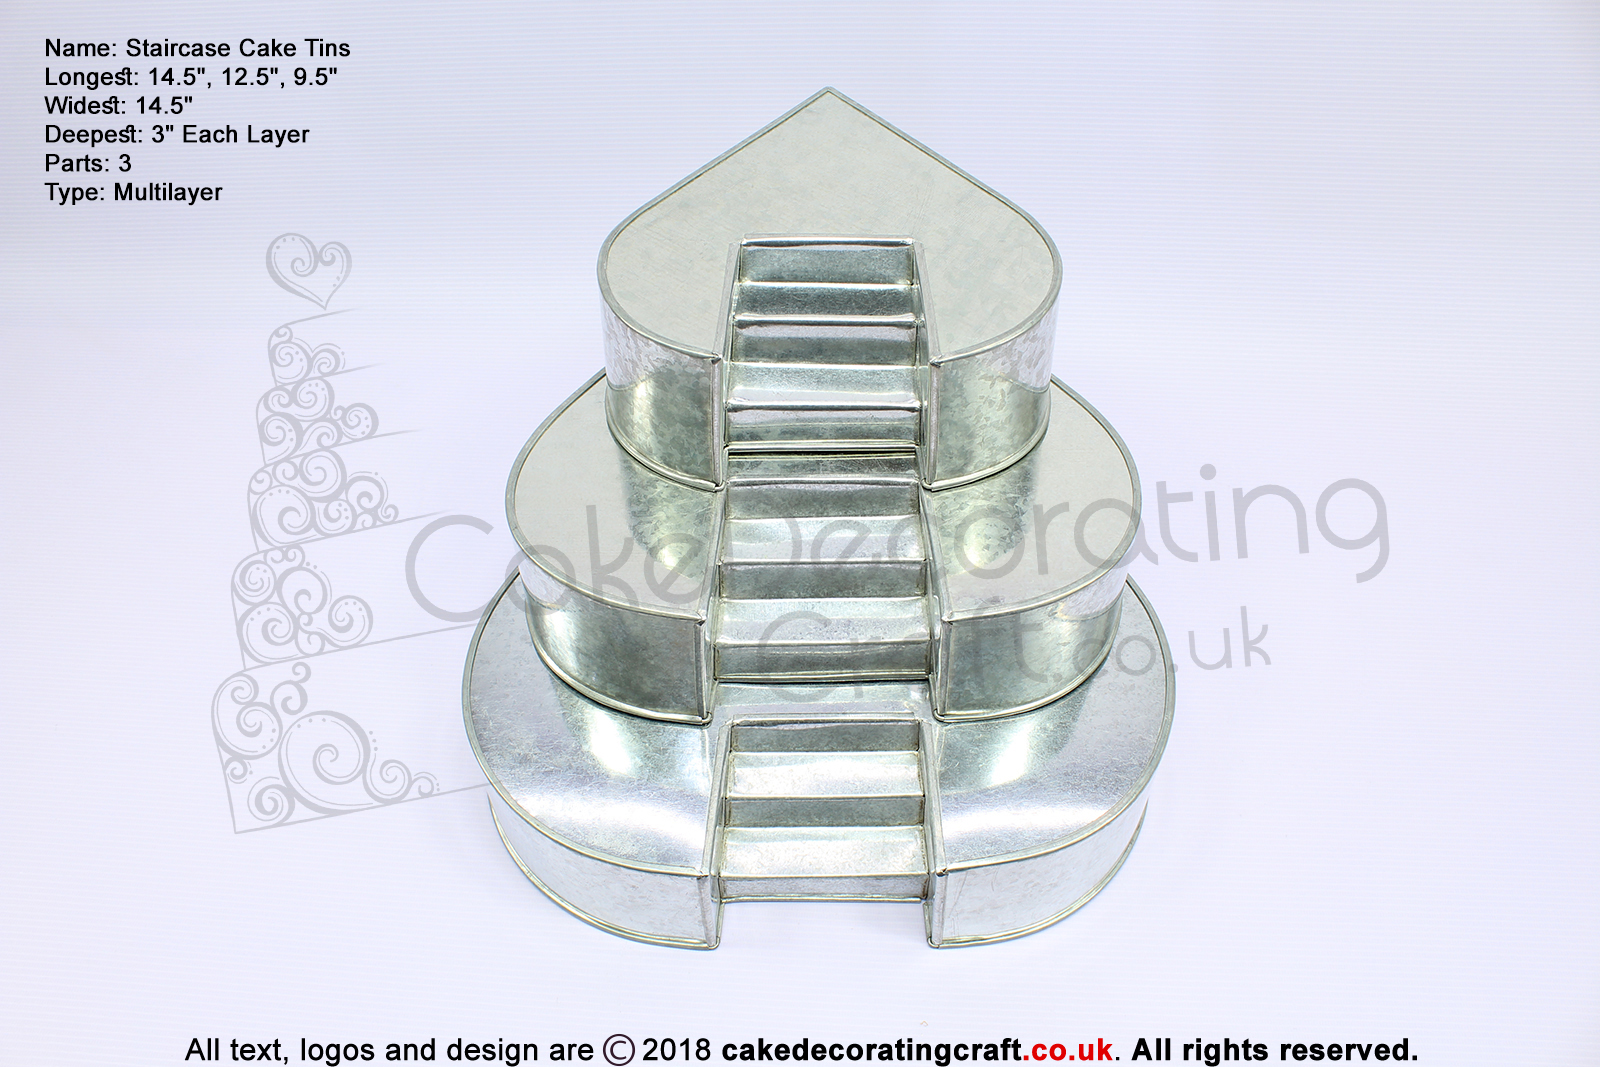 Heart Cake Baking Tins | Center Stairs | Wedding Multilayers | 3" Deep | 3 Tiers | Hand Made | Cake Makers Christmas Gifts Ideas